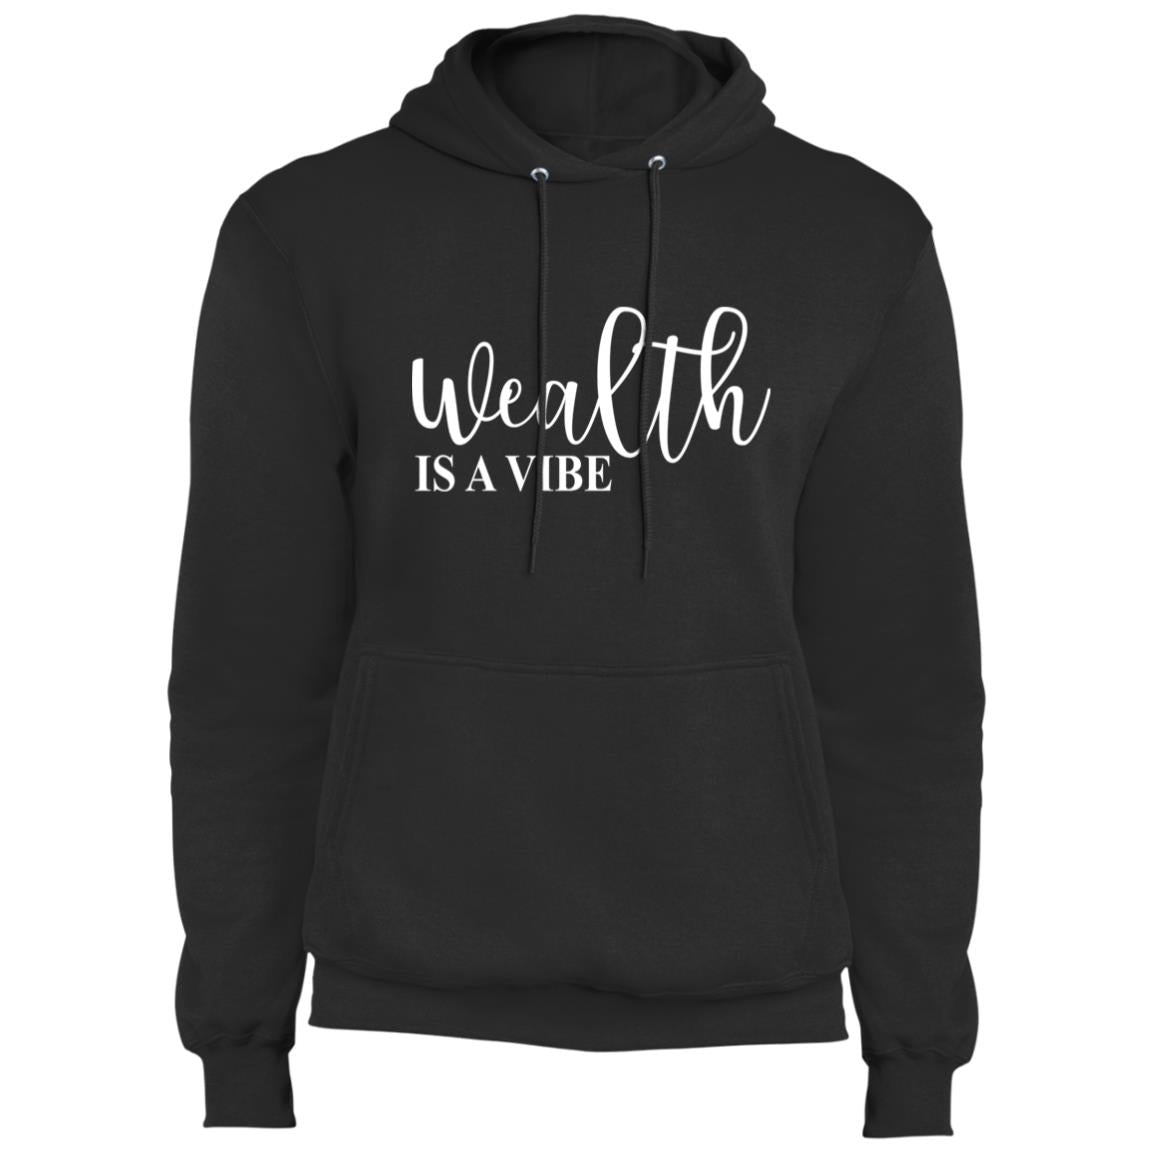 Wealth Is A Vibe - Fleece Pullover Hoodie